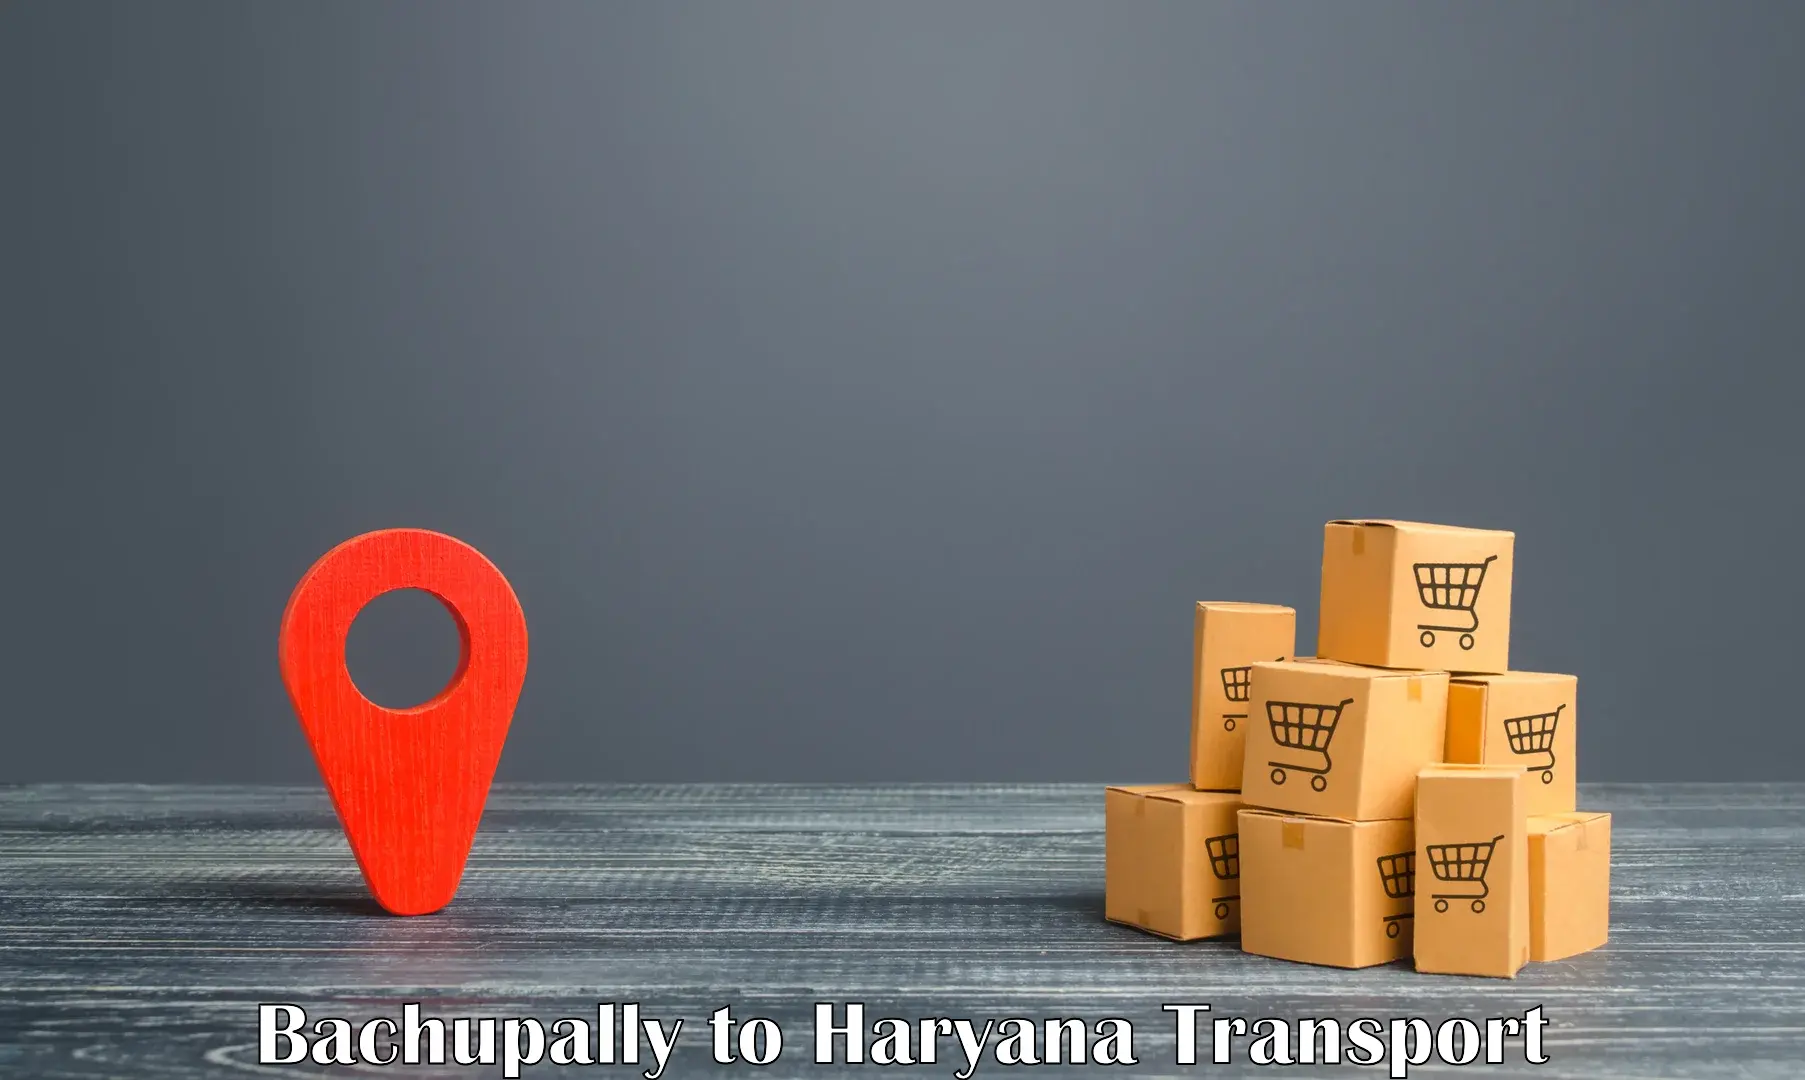 Logistics transportation services in Bachupally to Sonipat